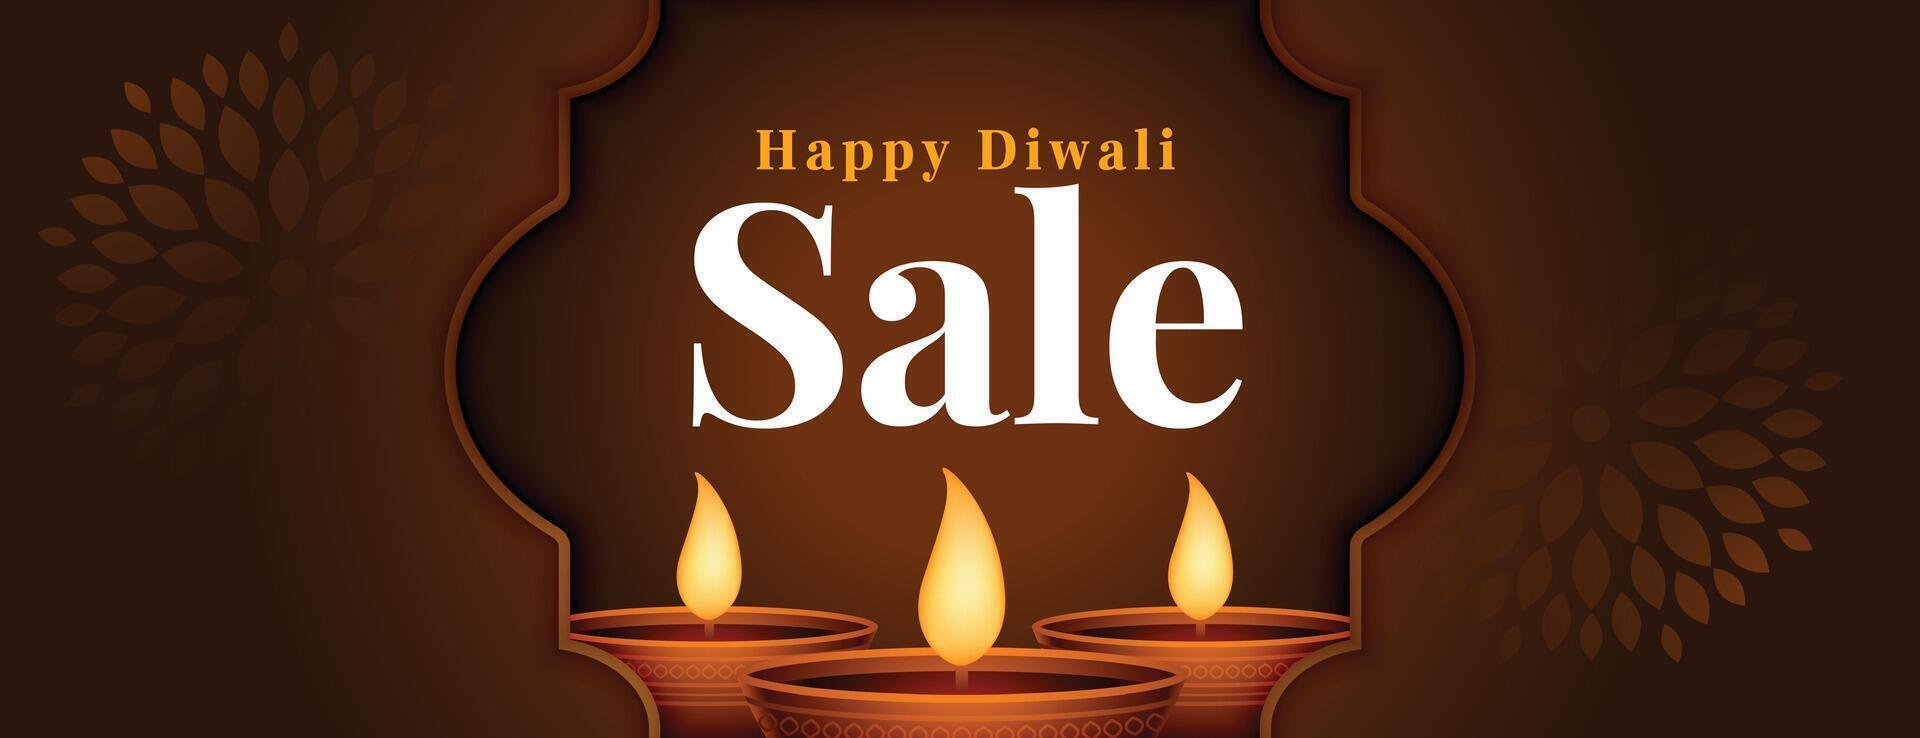 stylish happy diwali sale and offer banner with diya design vector